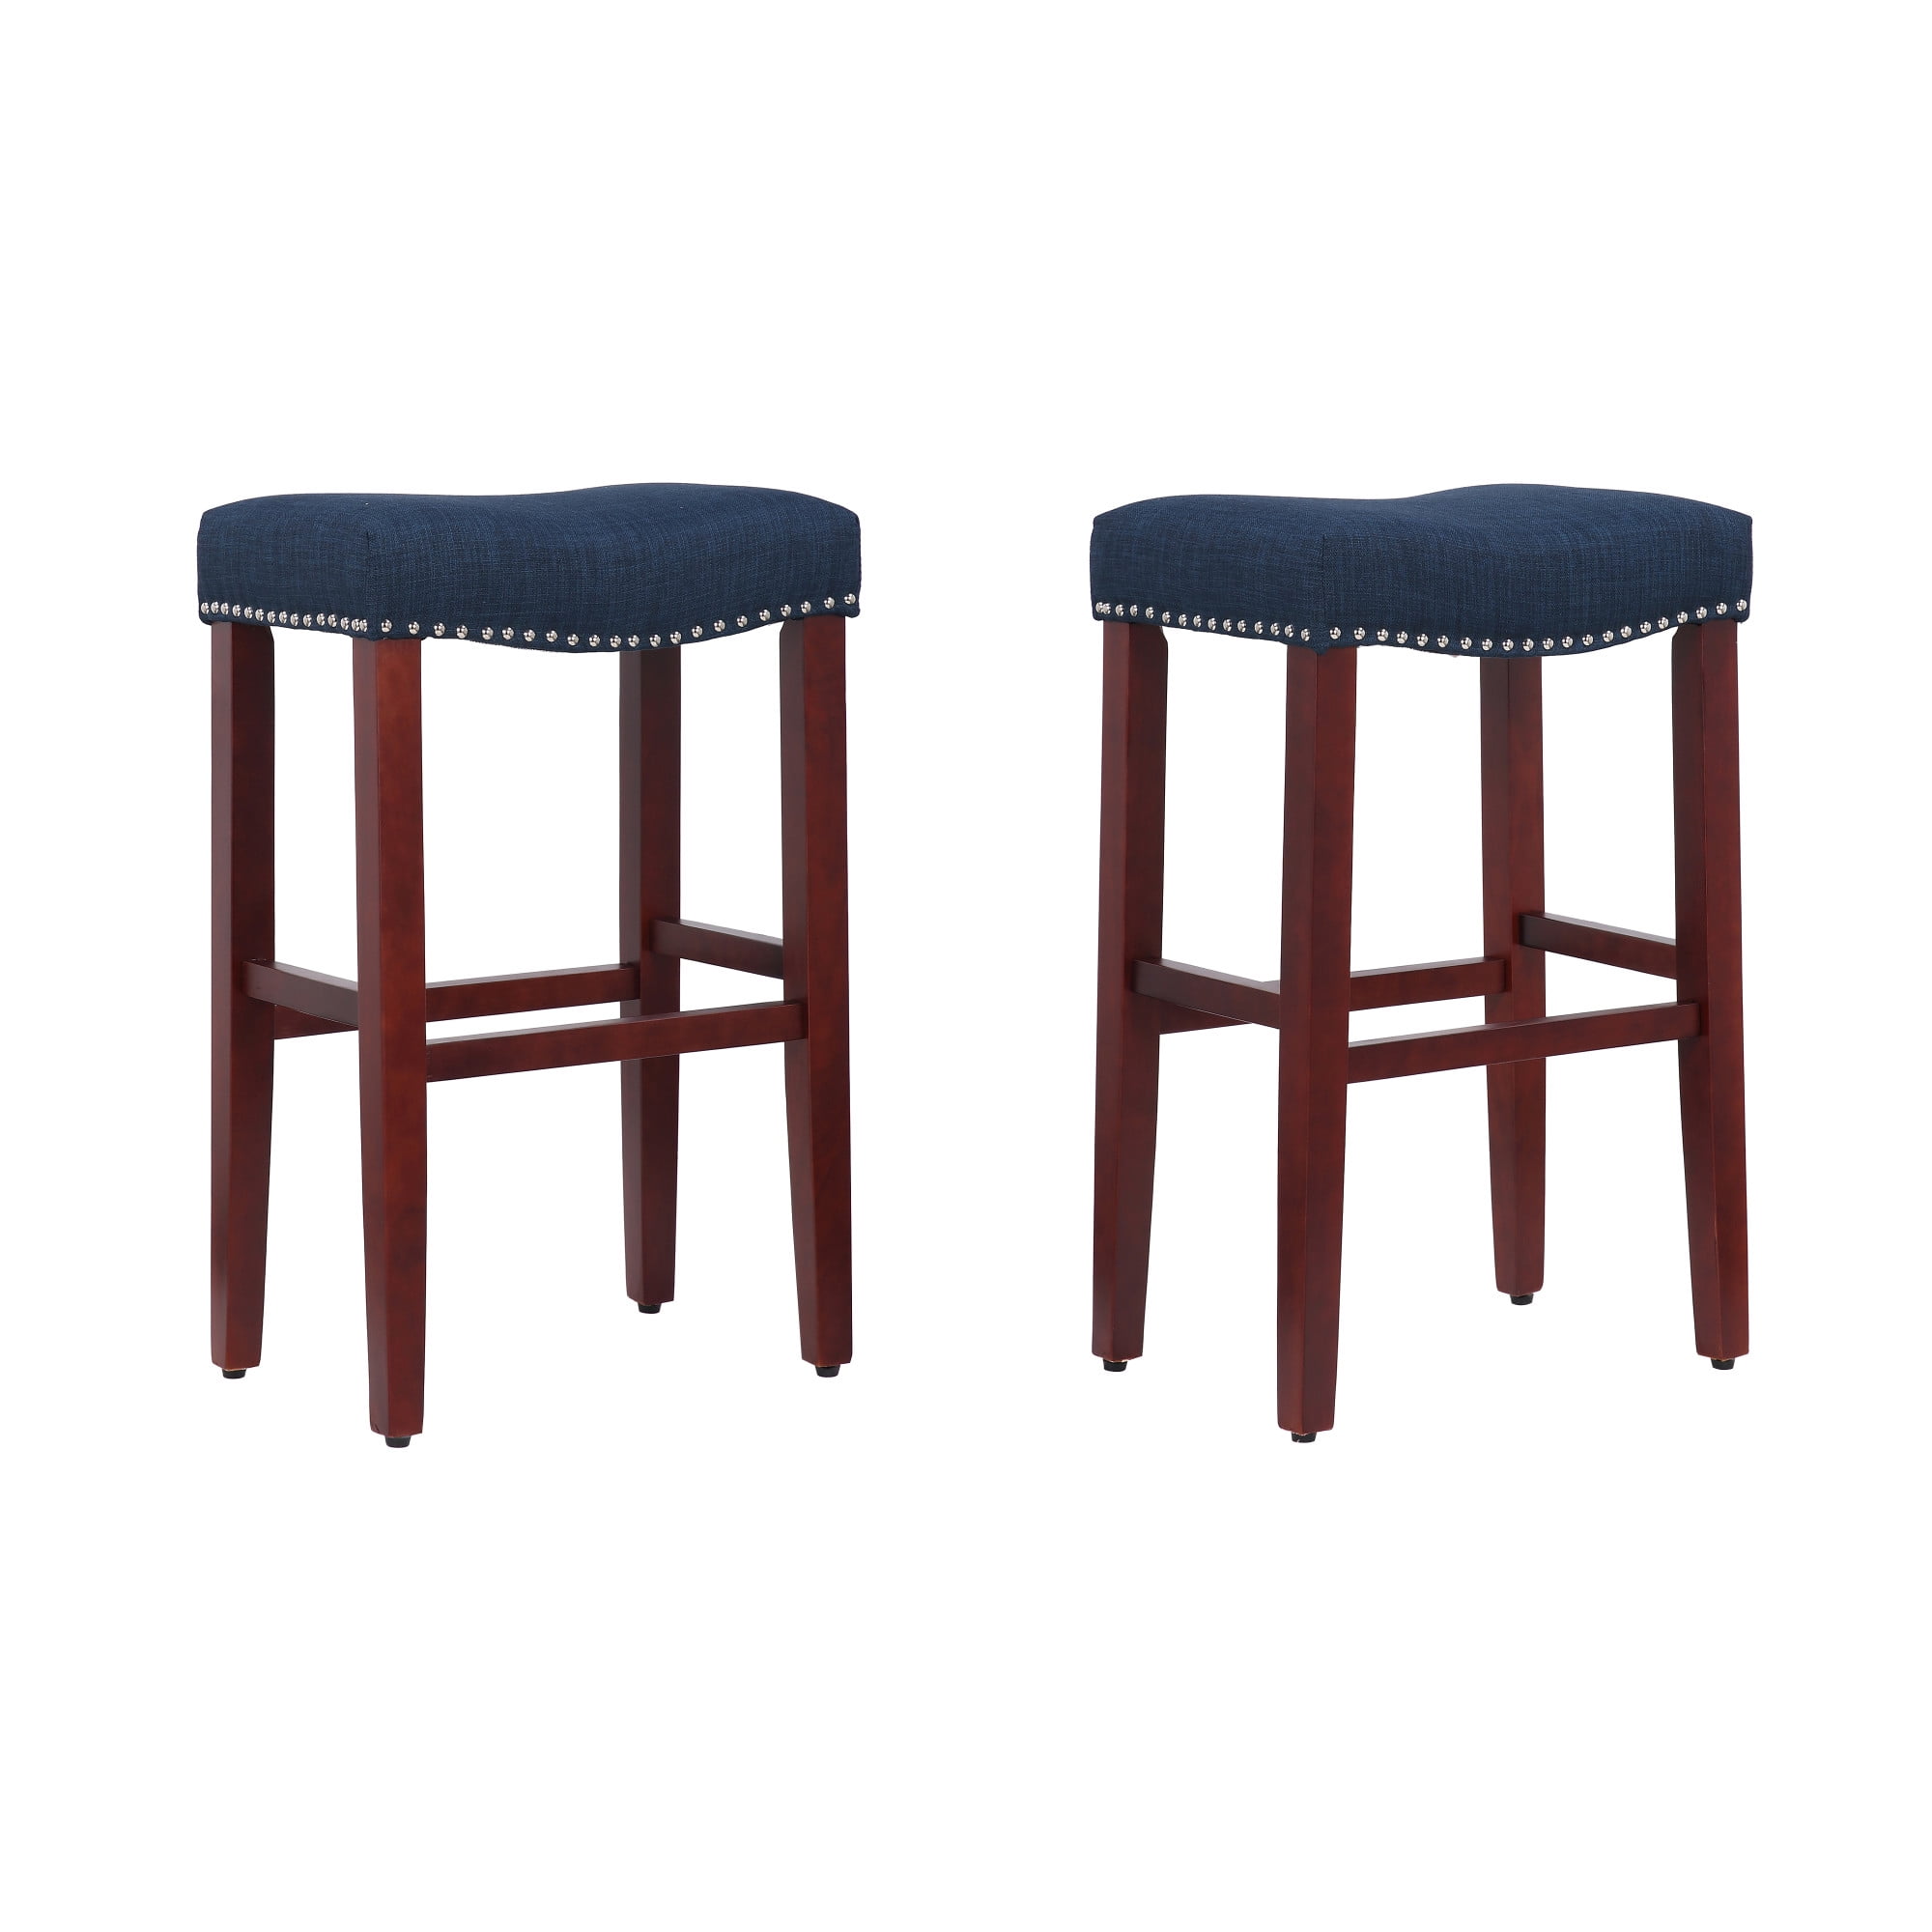 Wooden Linen Saddle Pub Chair 29" Bar Counter Stool Natural Wood Seat 